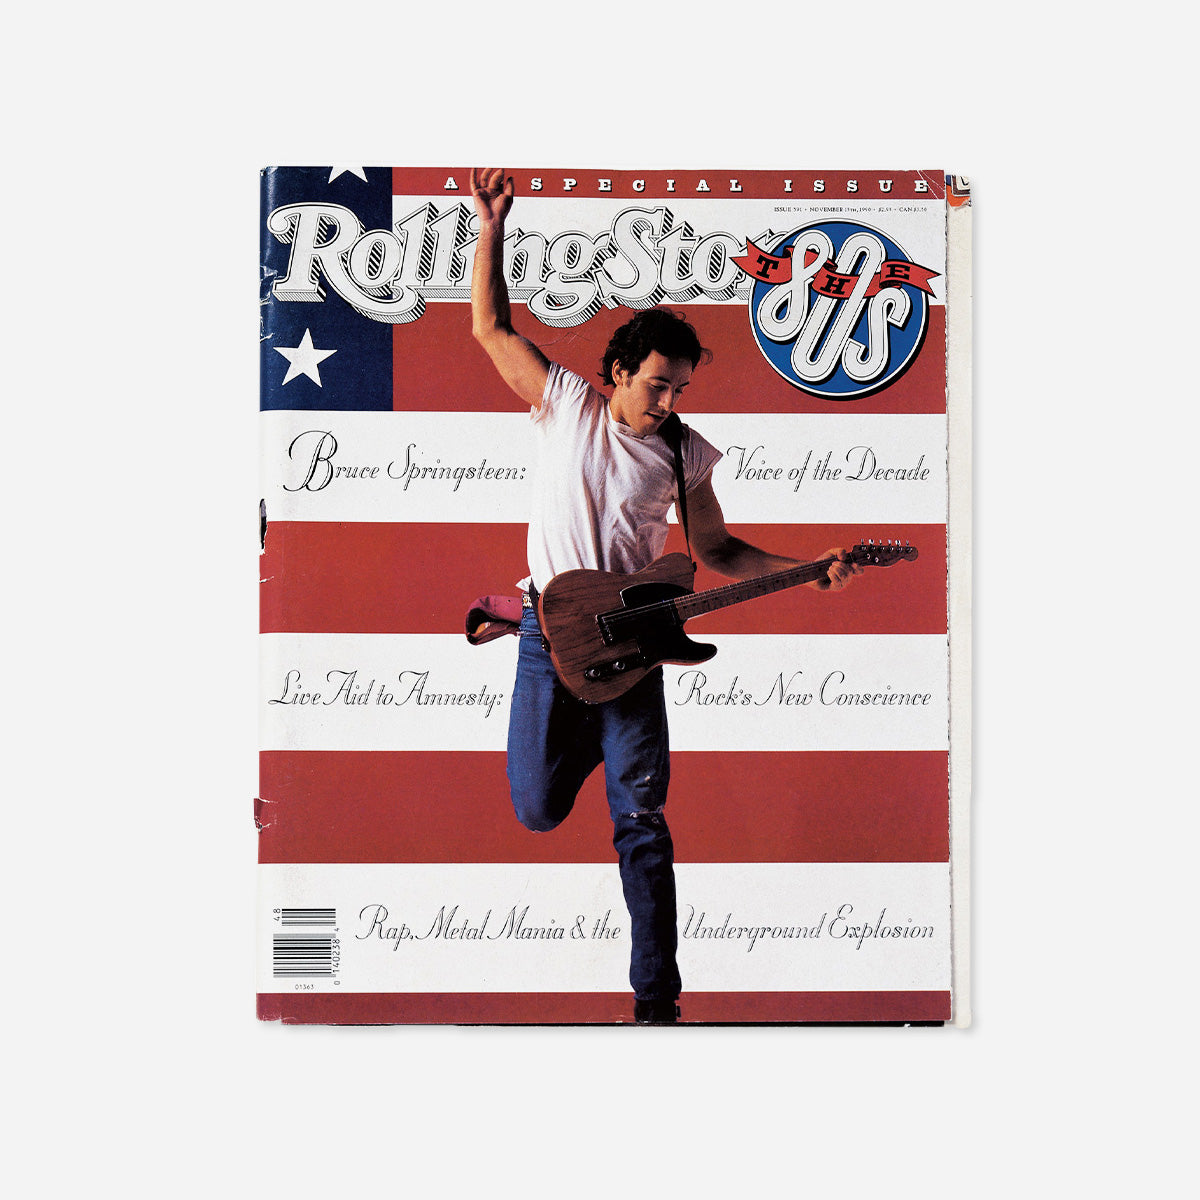 Rolling Stone Magazine November 15, 1990 Featuring Bruce Springsteen (Issue 591)